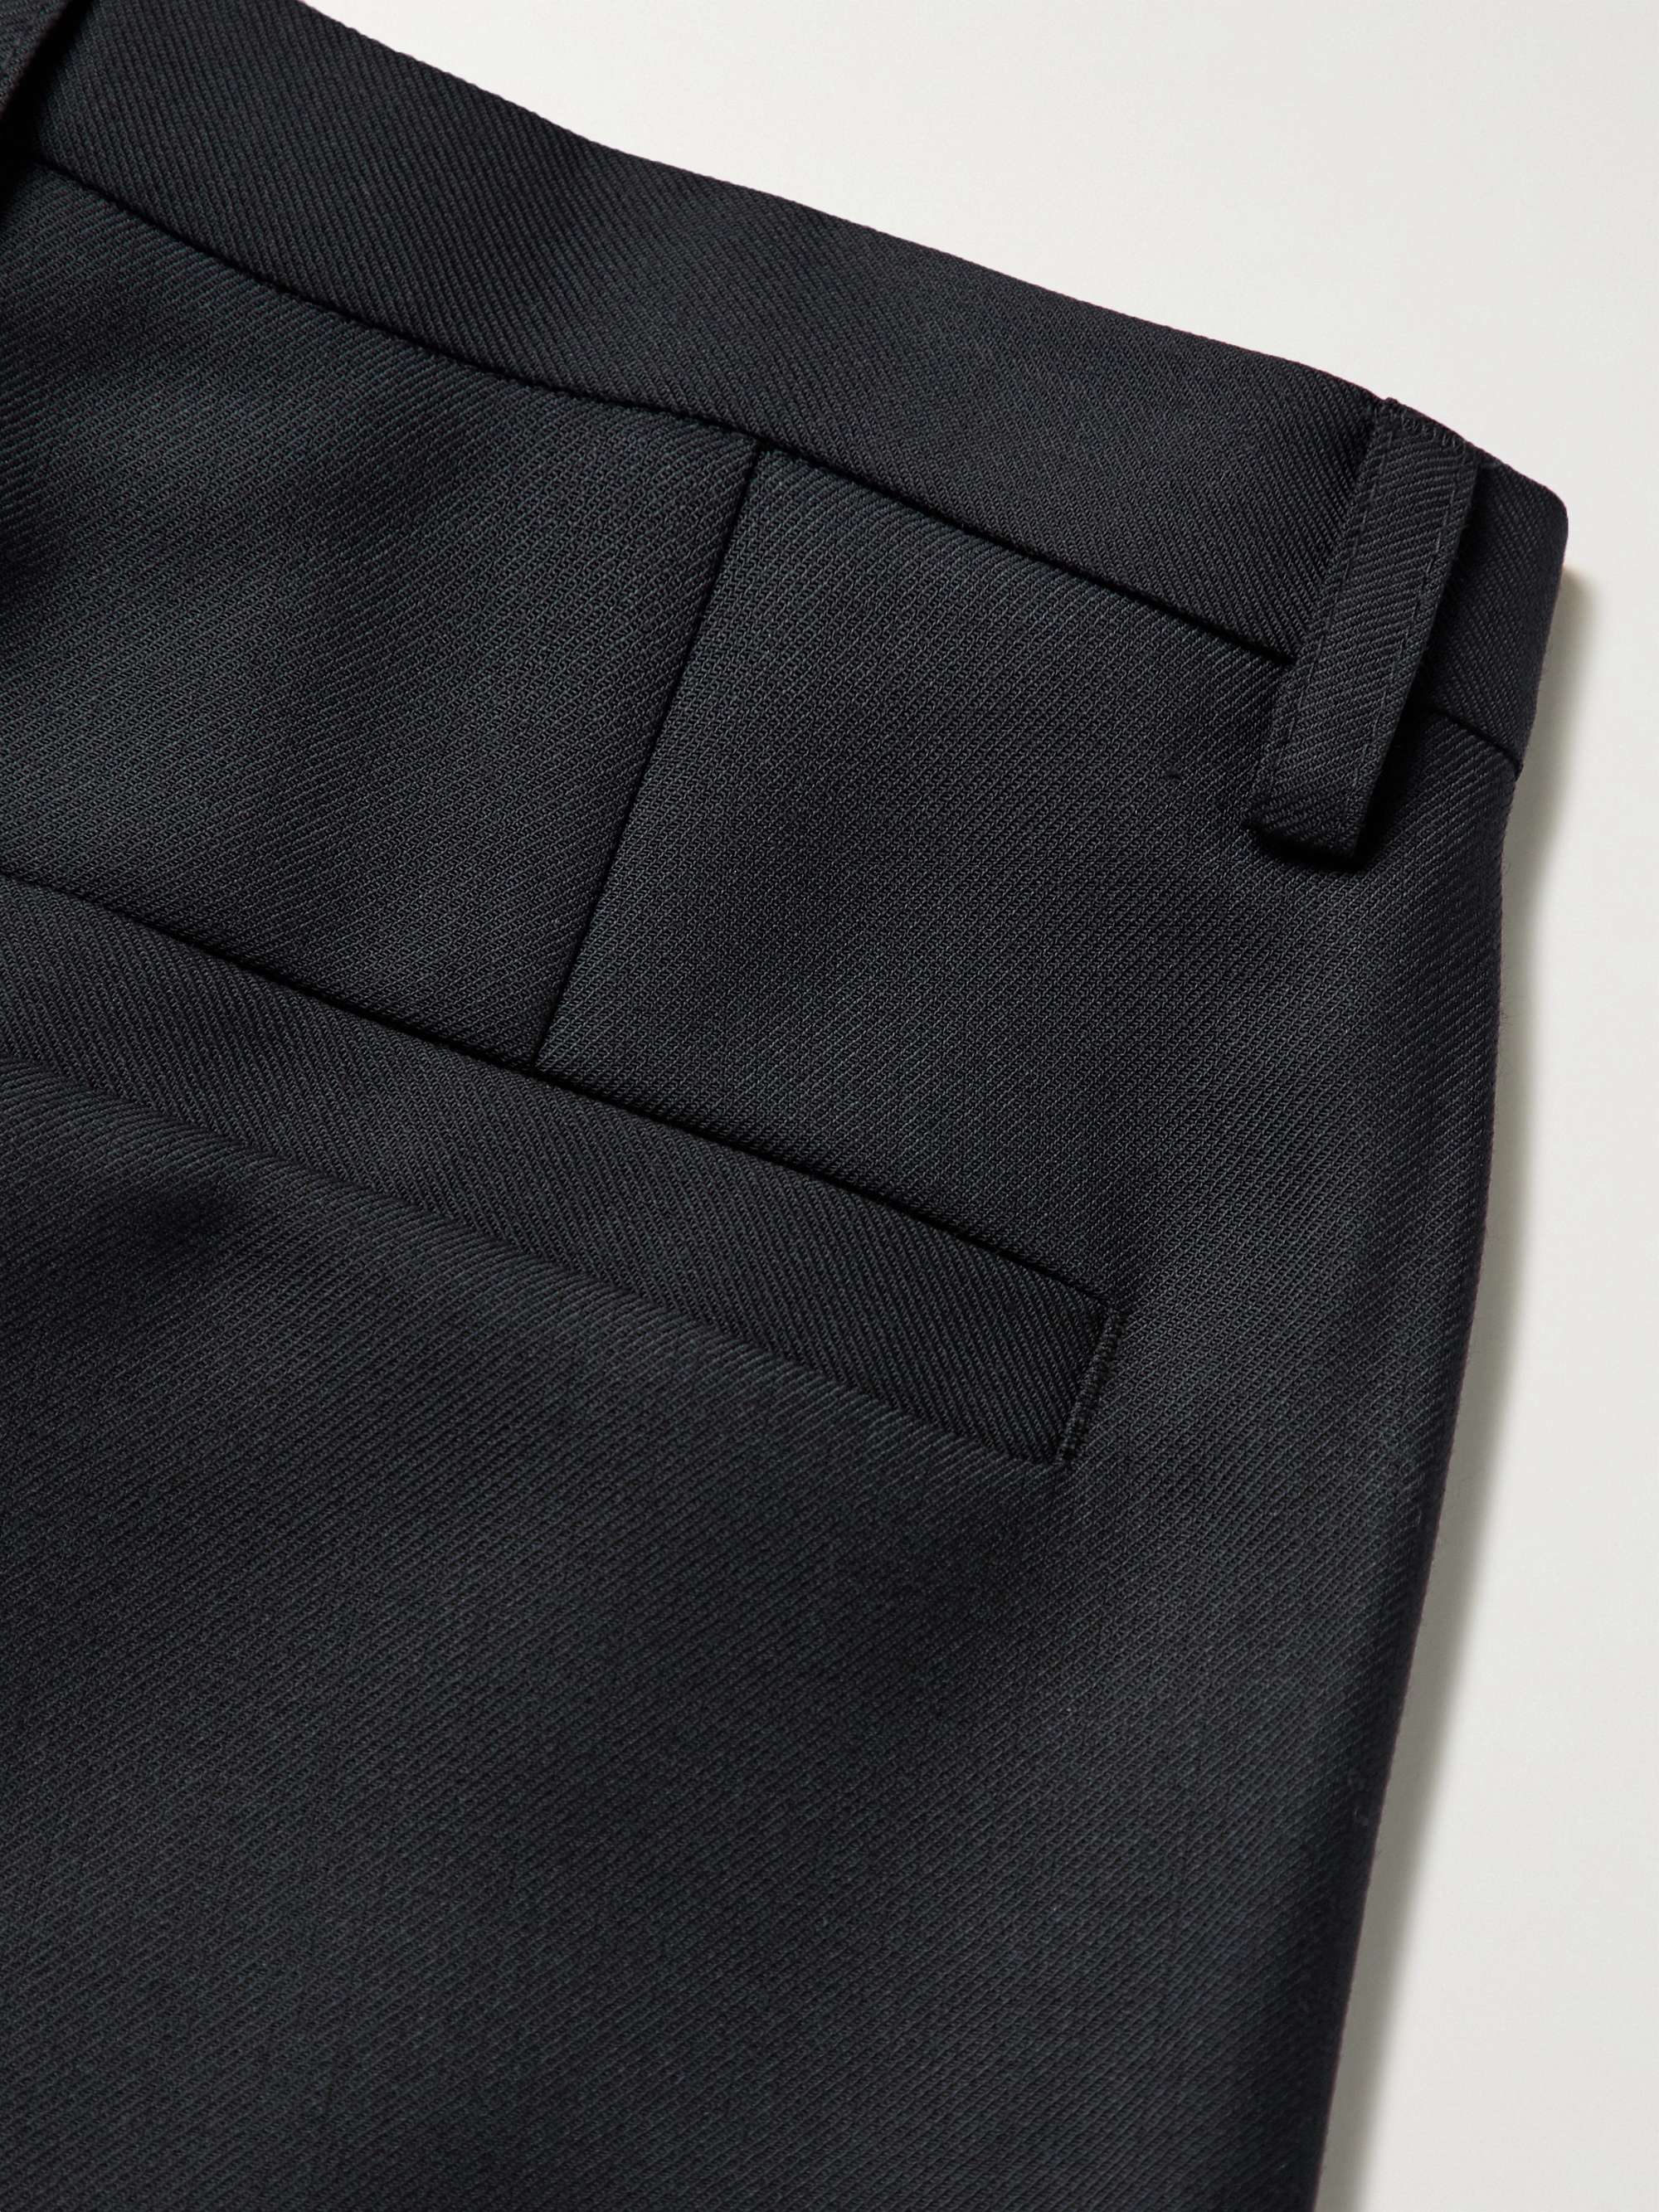 SÉFR Harvey Slim-Fit Tapered Woven Trousers